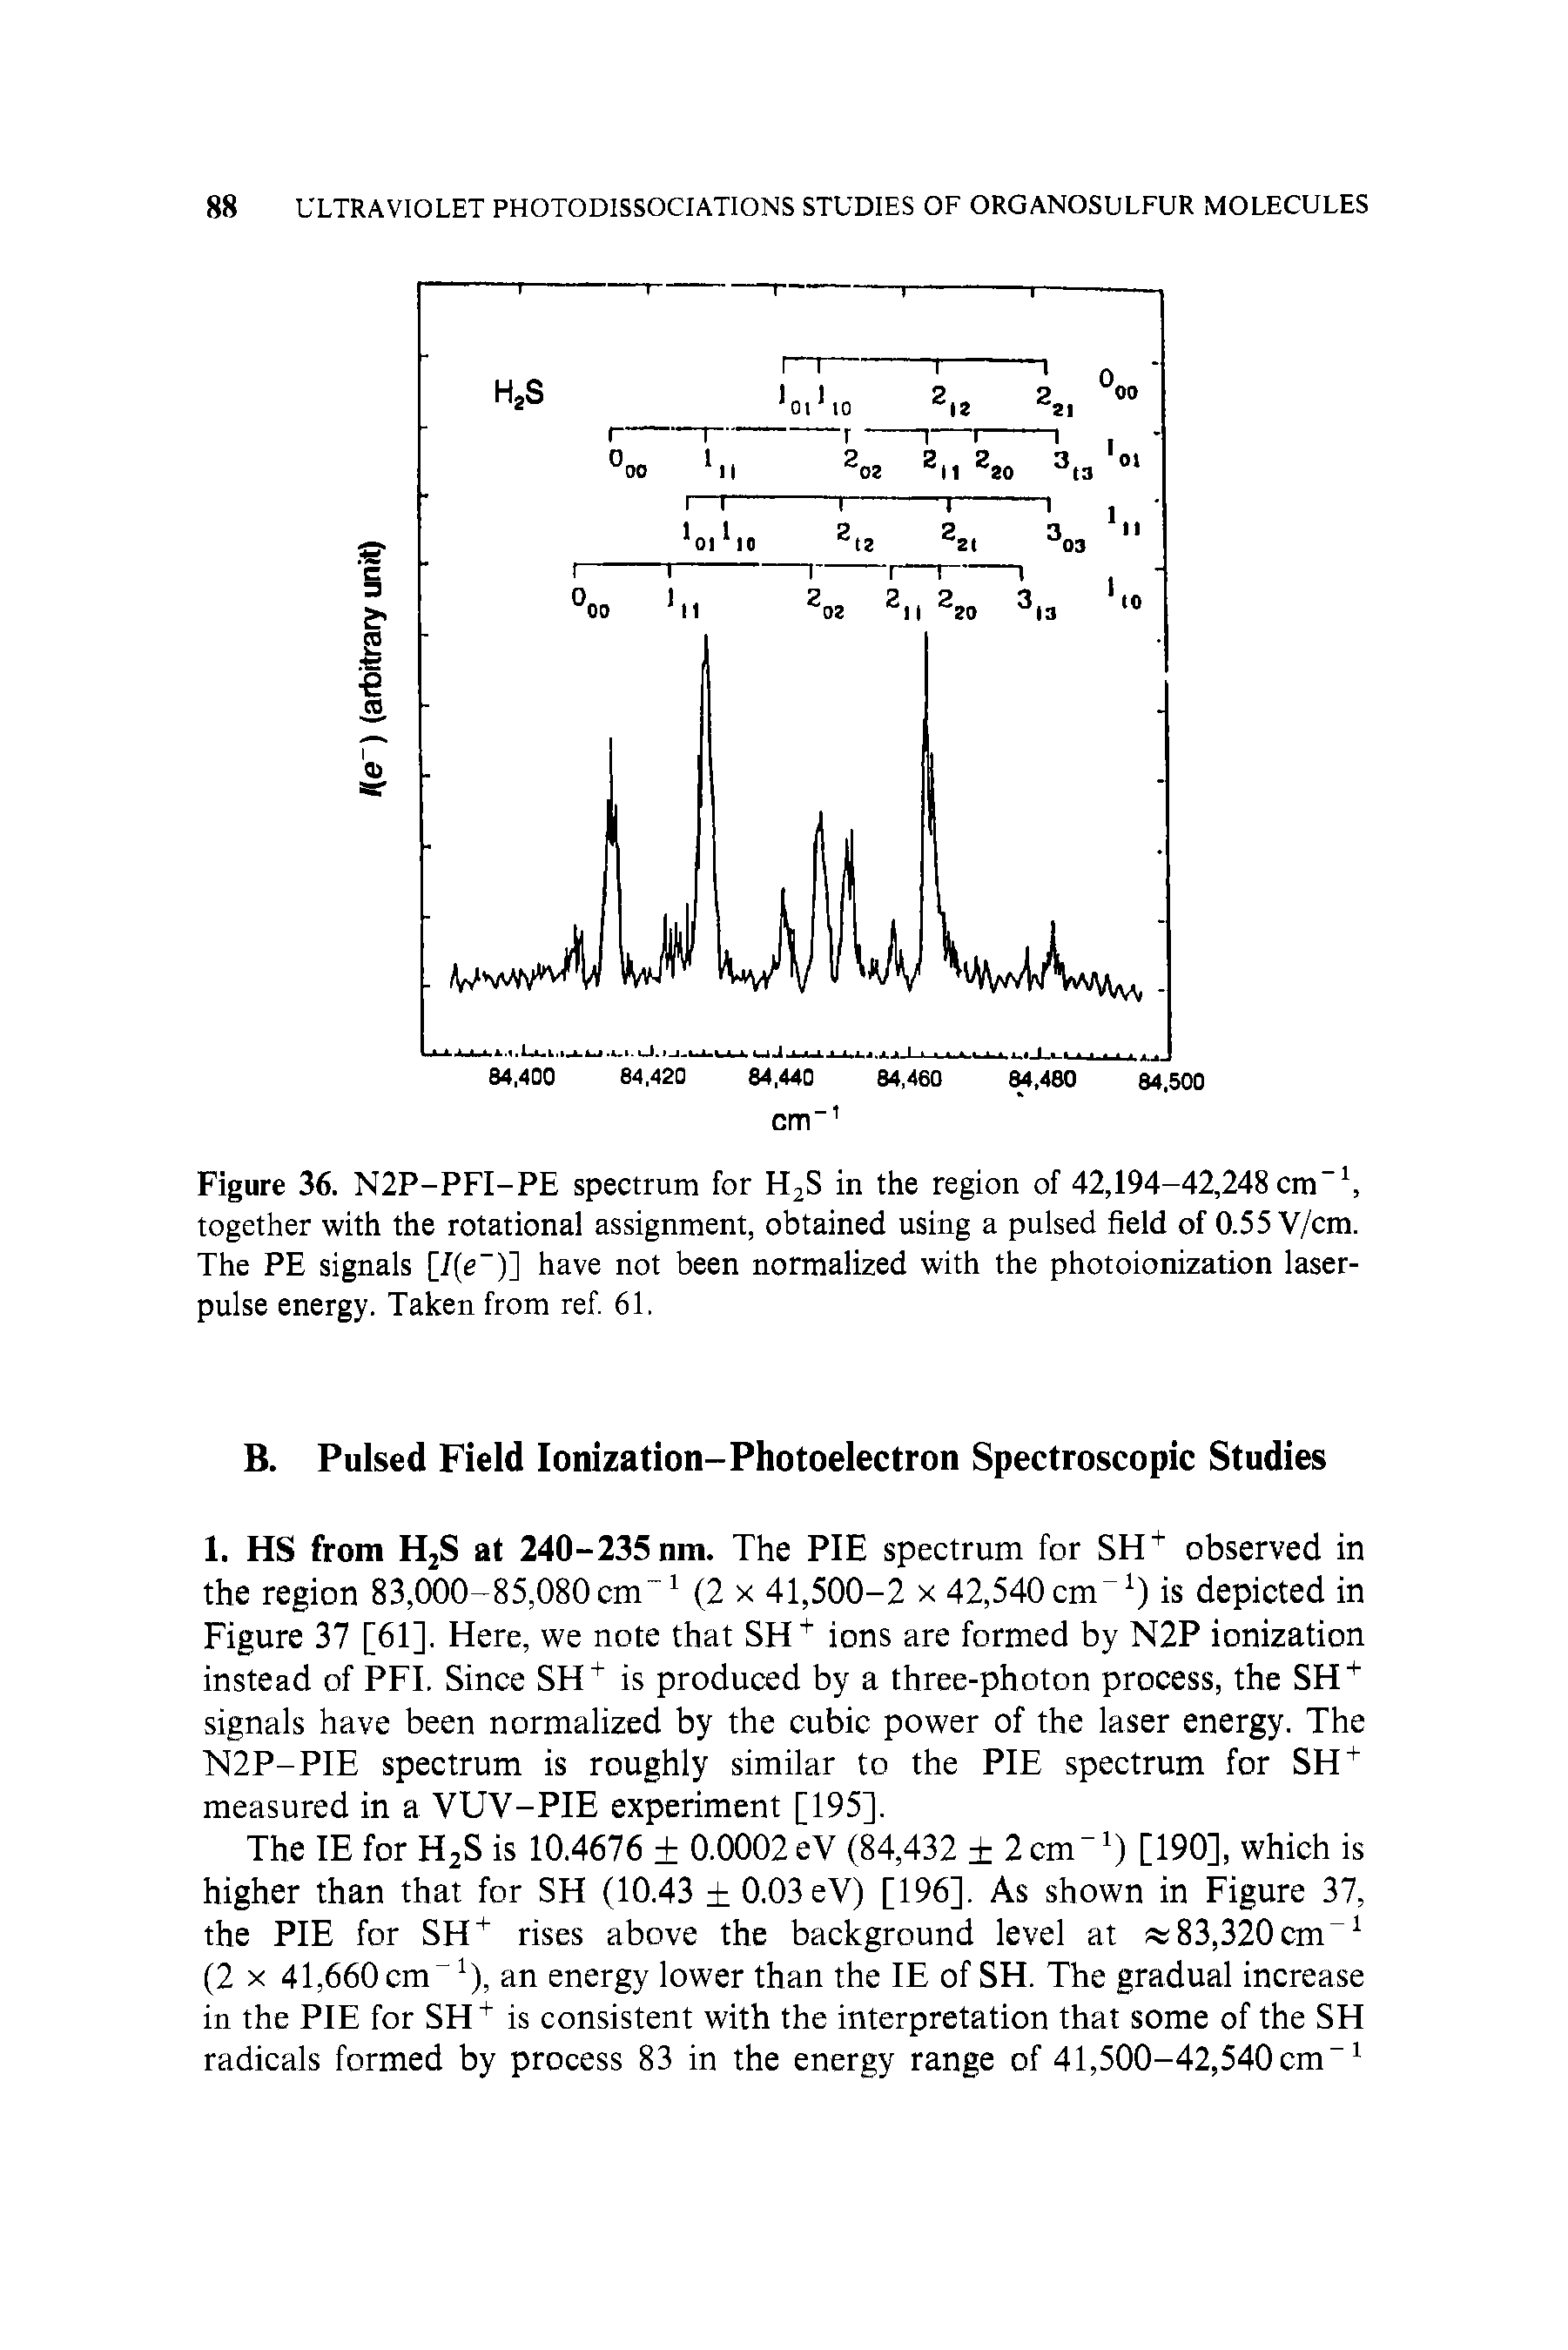 Figure 36. N2P-PFI-PE spectrum for H2S in the region of 42,194-42,248 cm together with the rotational assignment, obtained using a pulsed field of 0.55 V/cm. The PE signals [/(e )] have not been normalized with the photoionization laser-pulse energy. Taken from ref. 61.